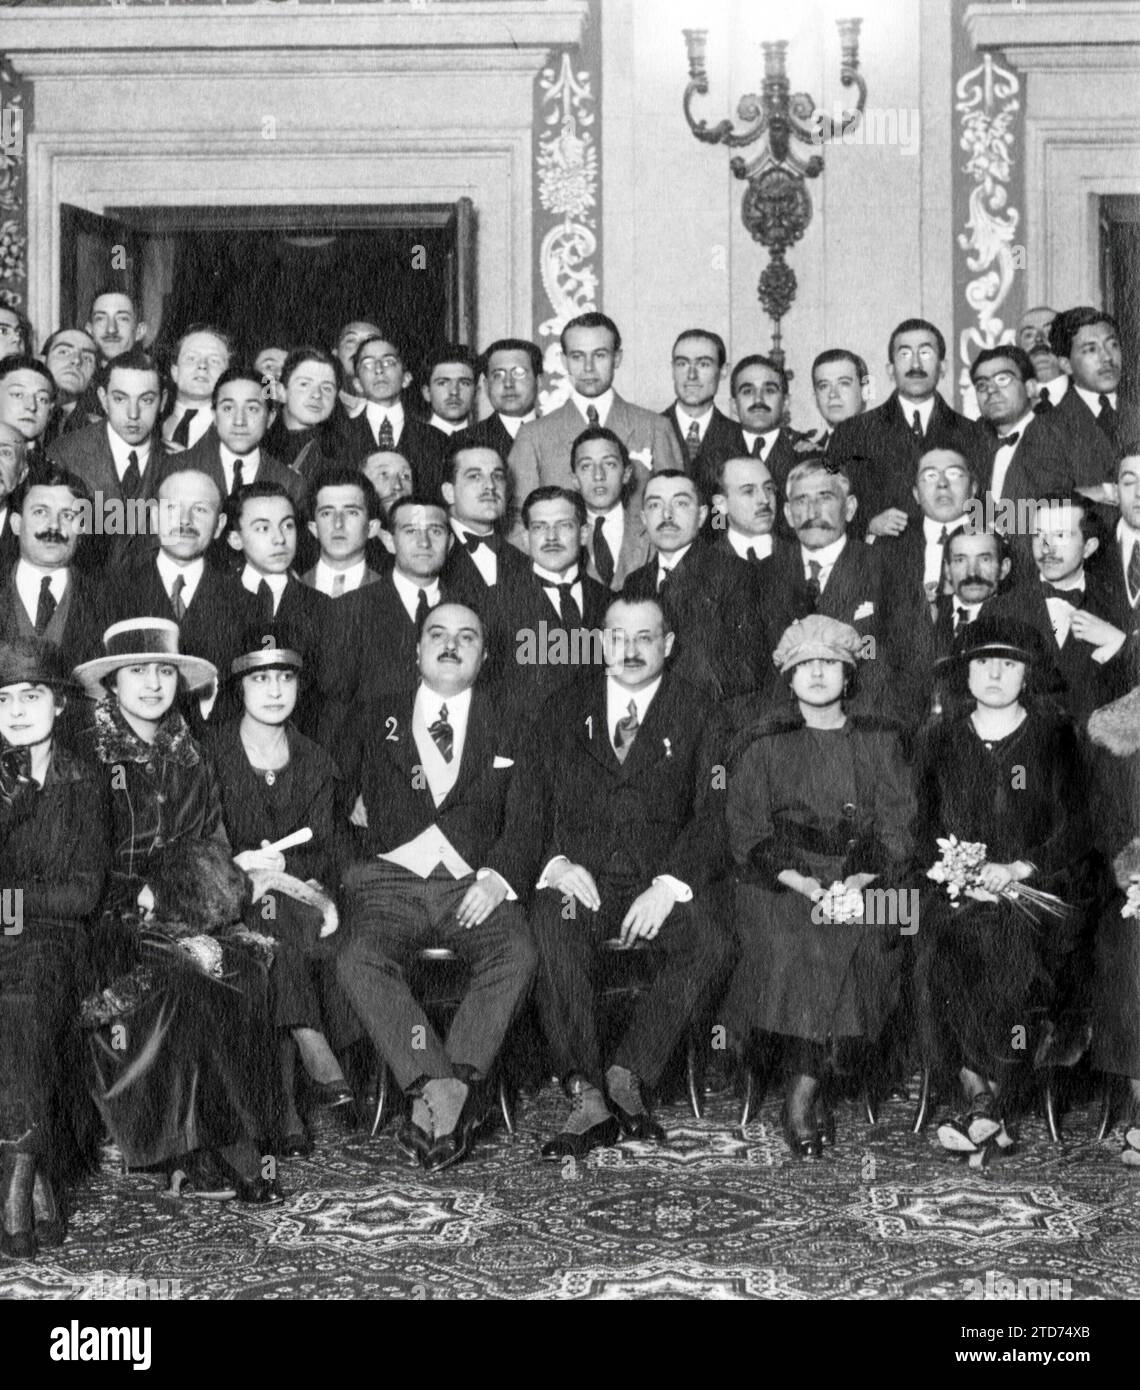 01/27/1919. In the Madrid city hall. The Mayor (1), with the president of the Civil Health Congress, Dr. Albiñana (2), and the Concurrent At the party held yesterday as a gift to the Congressmen. Credit: Album / Archivo ABC / Julio Duque Stock Photo